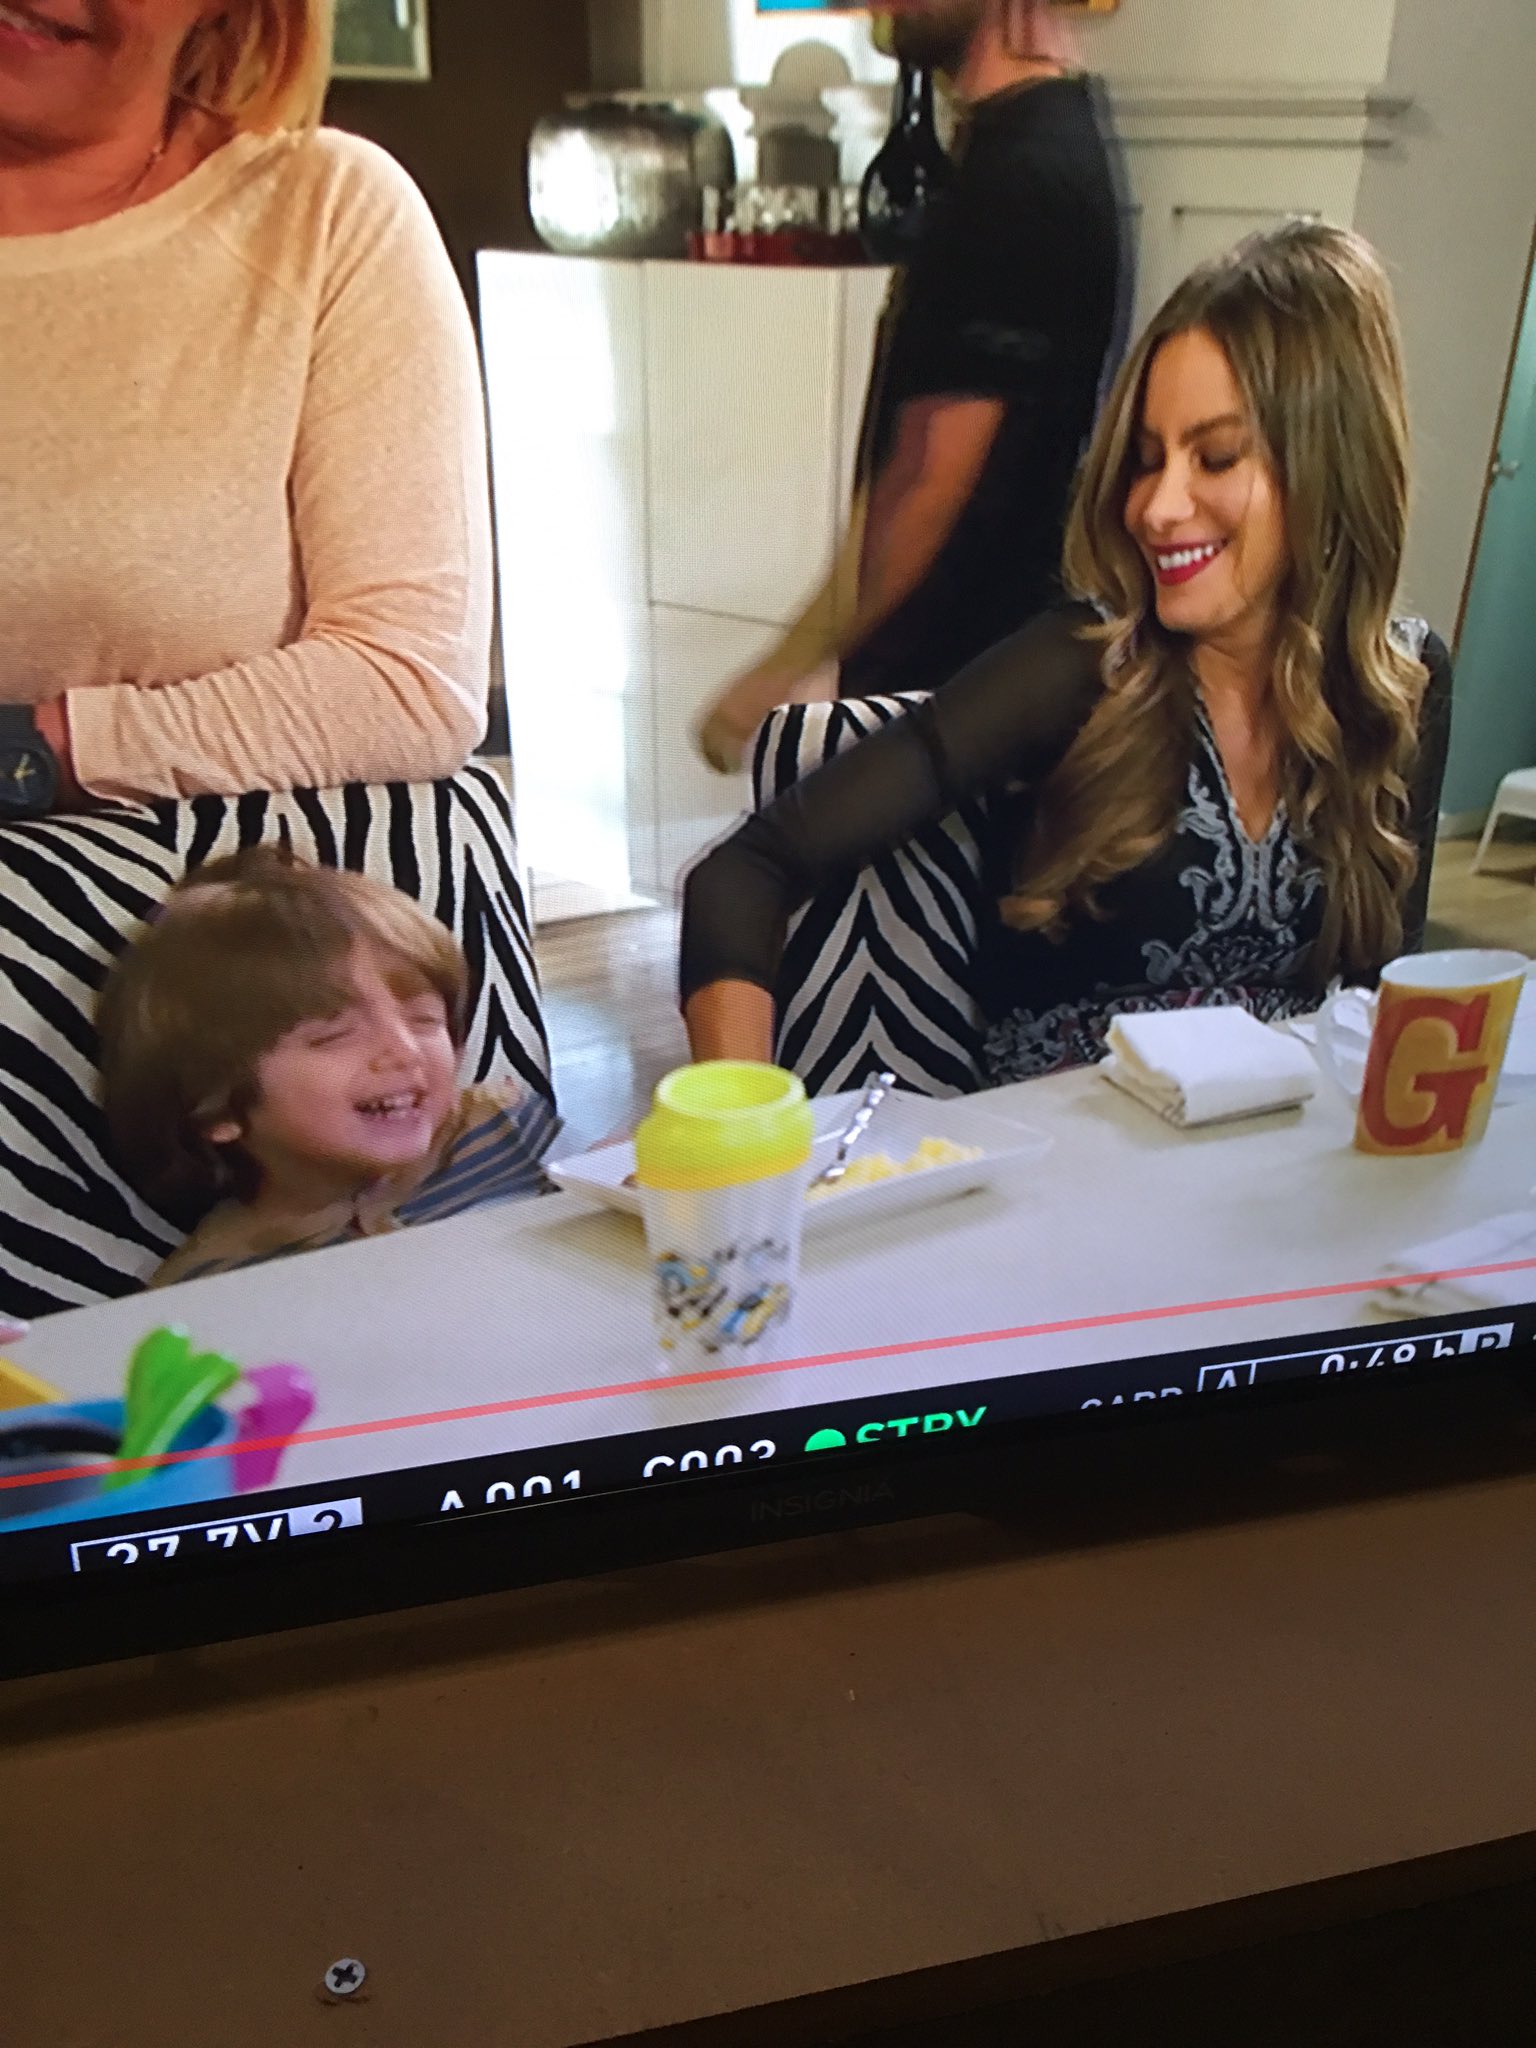 Jeremy Maguire on X: Tickles between takes! @SofiaVergara Happy Monday!  Have a great work week! #tvmom #sheswonderful #modernfamily  t.coHjuHcvRvsw  X